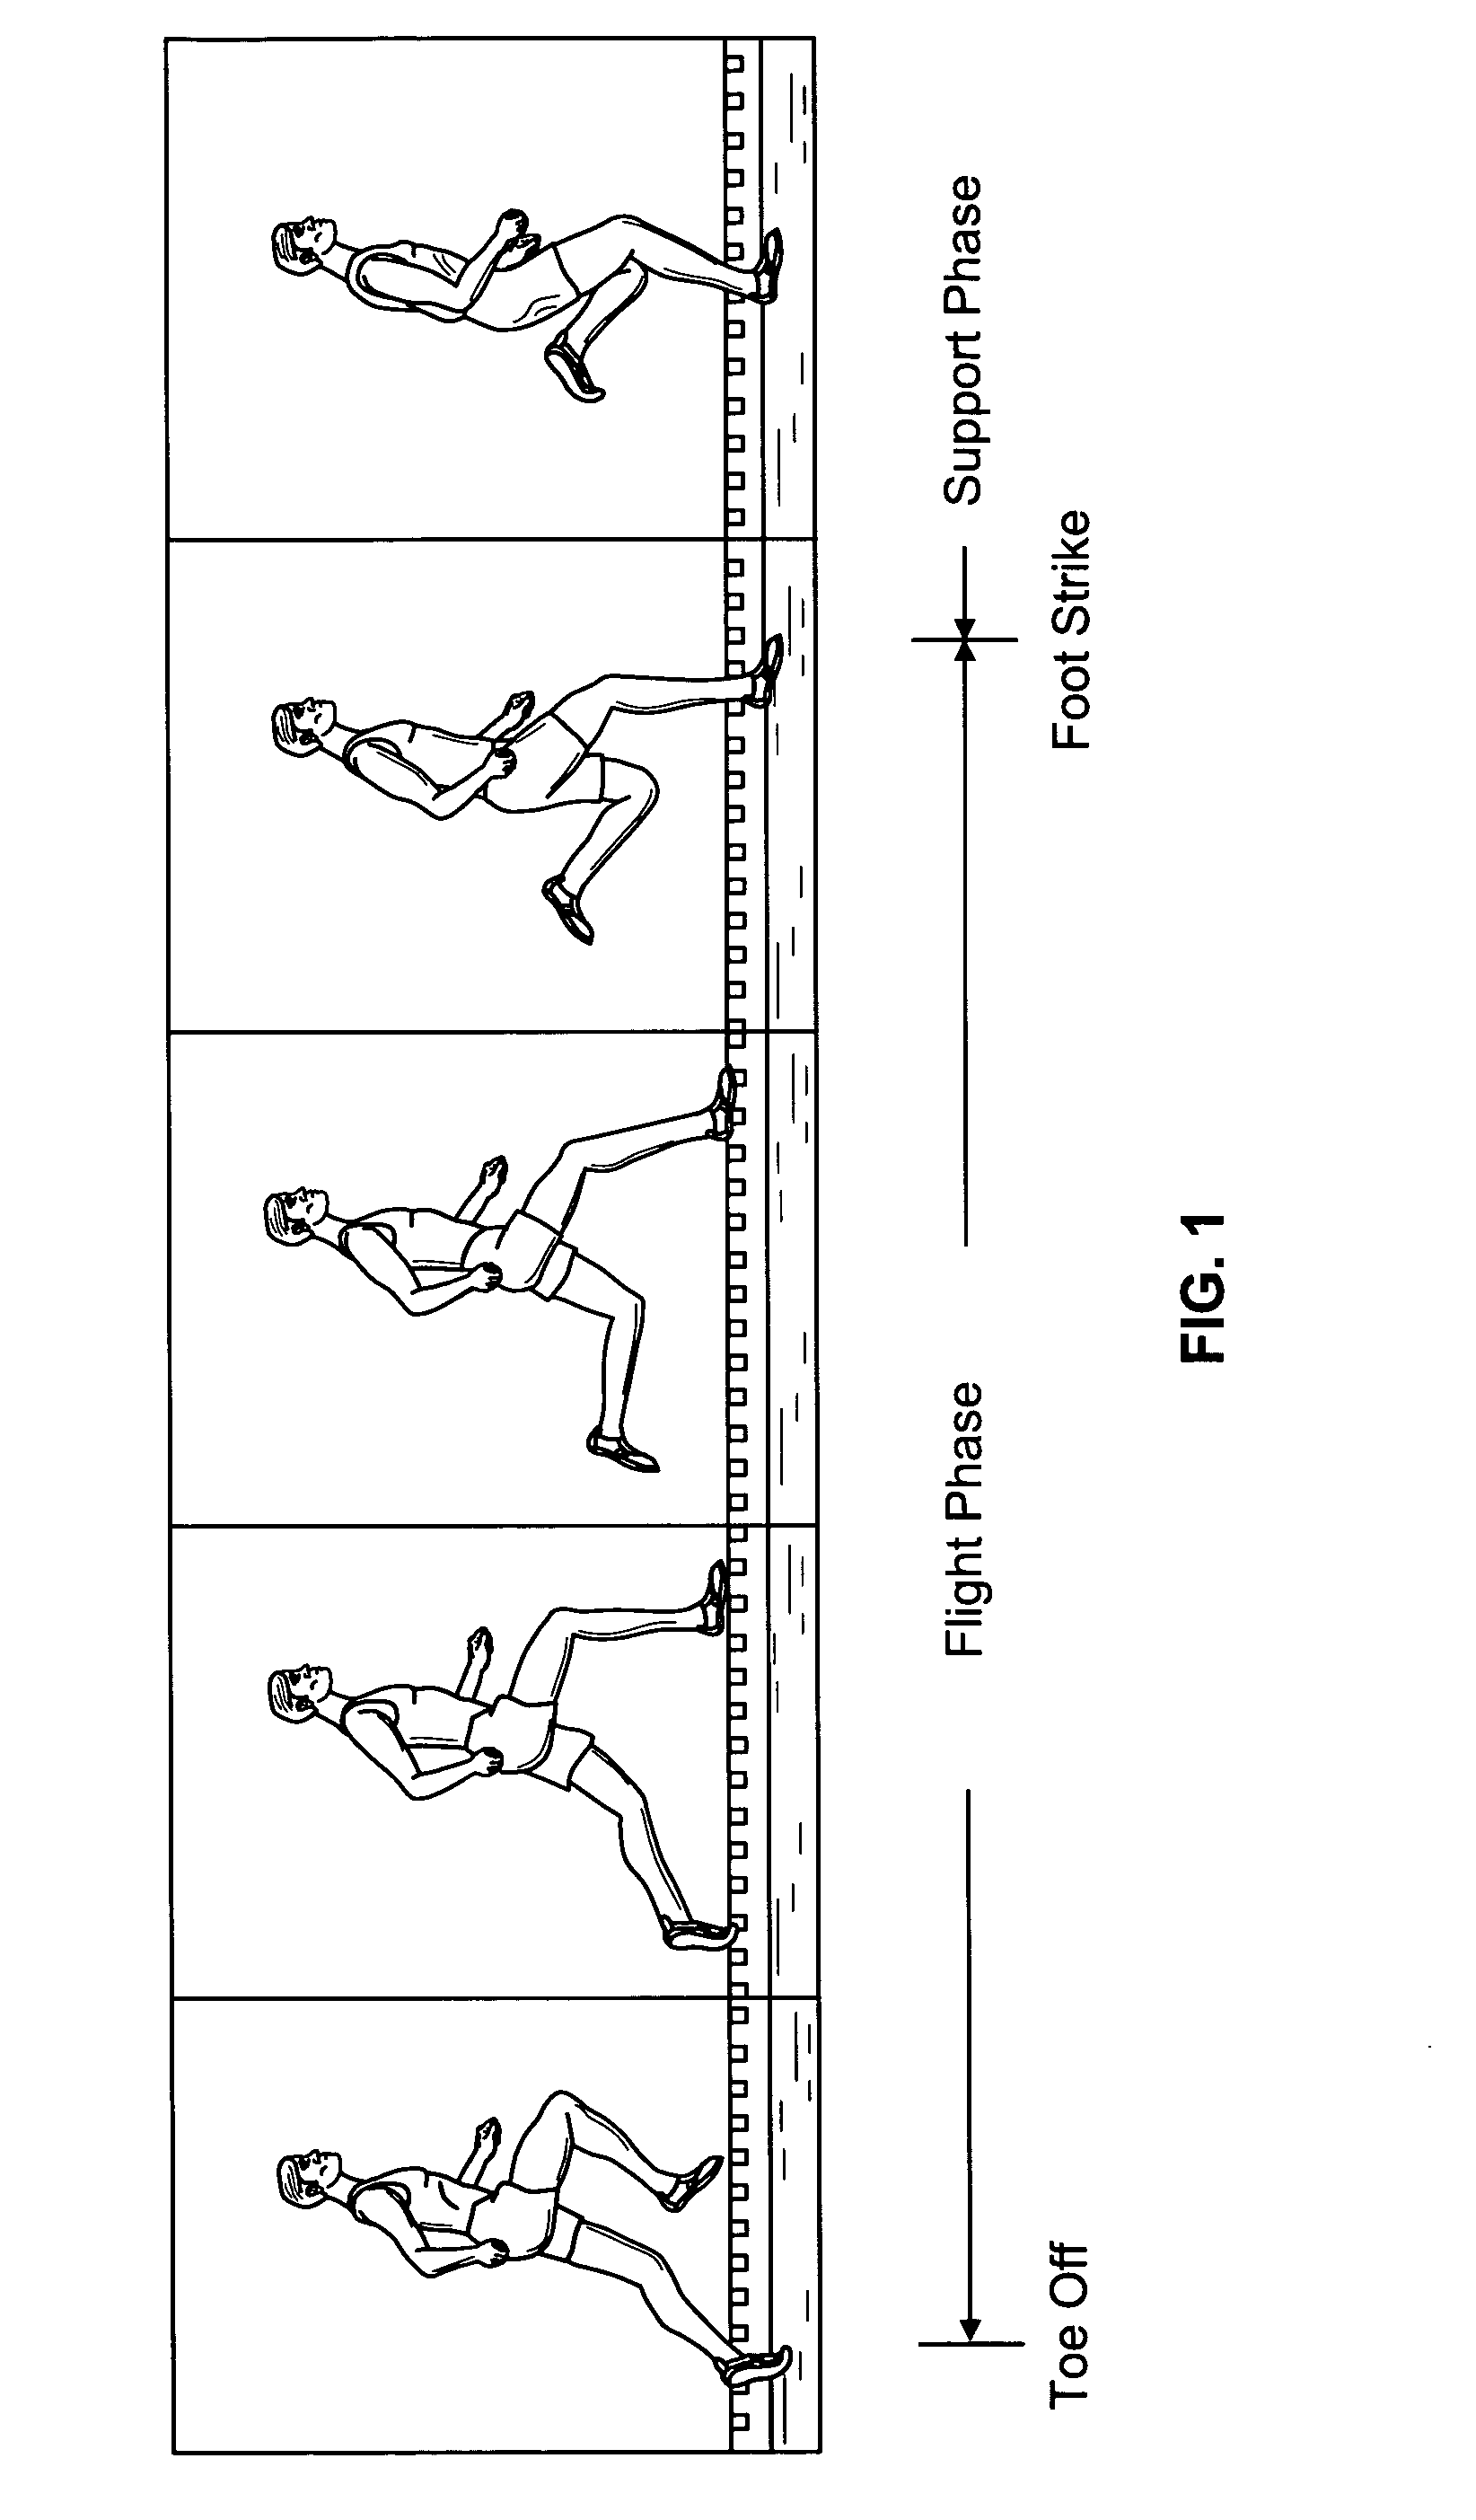 System and methods for digital human model prediction and simulation